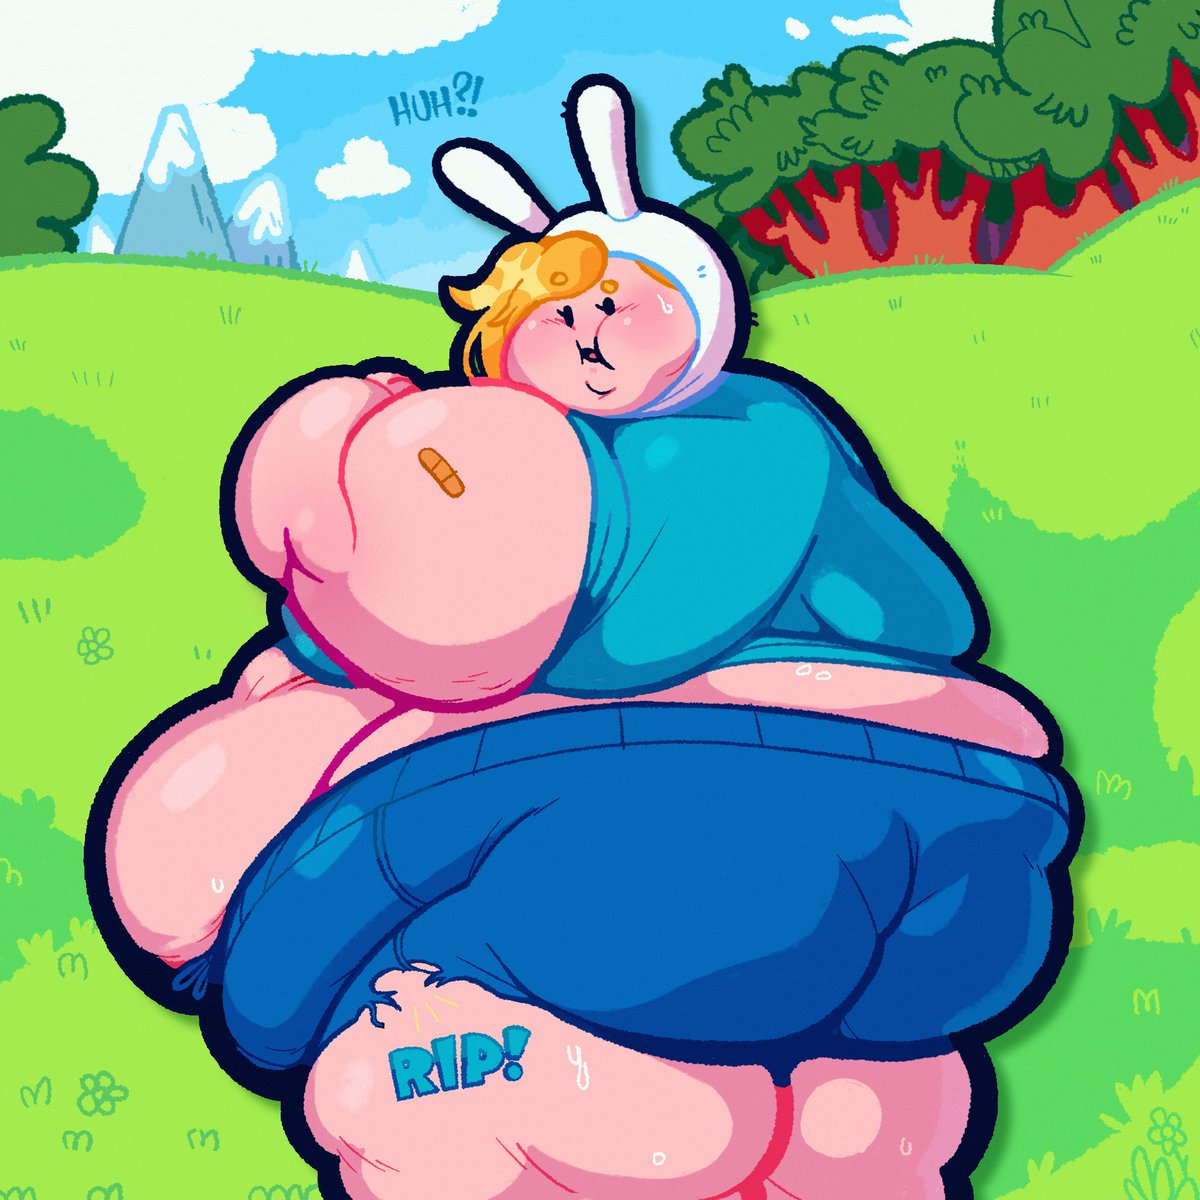 I recently finished watching the Fionna and Cake series on Max, and seeing how stoked Fionna was to see a kingdom made out of candy made me LIVE!! I knew she was a fatass at heart hehe. Here she is after spending a bit too much time in the Candy Kingdom. 😈🍪🍬🍫🍩